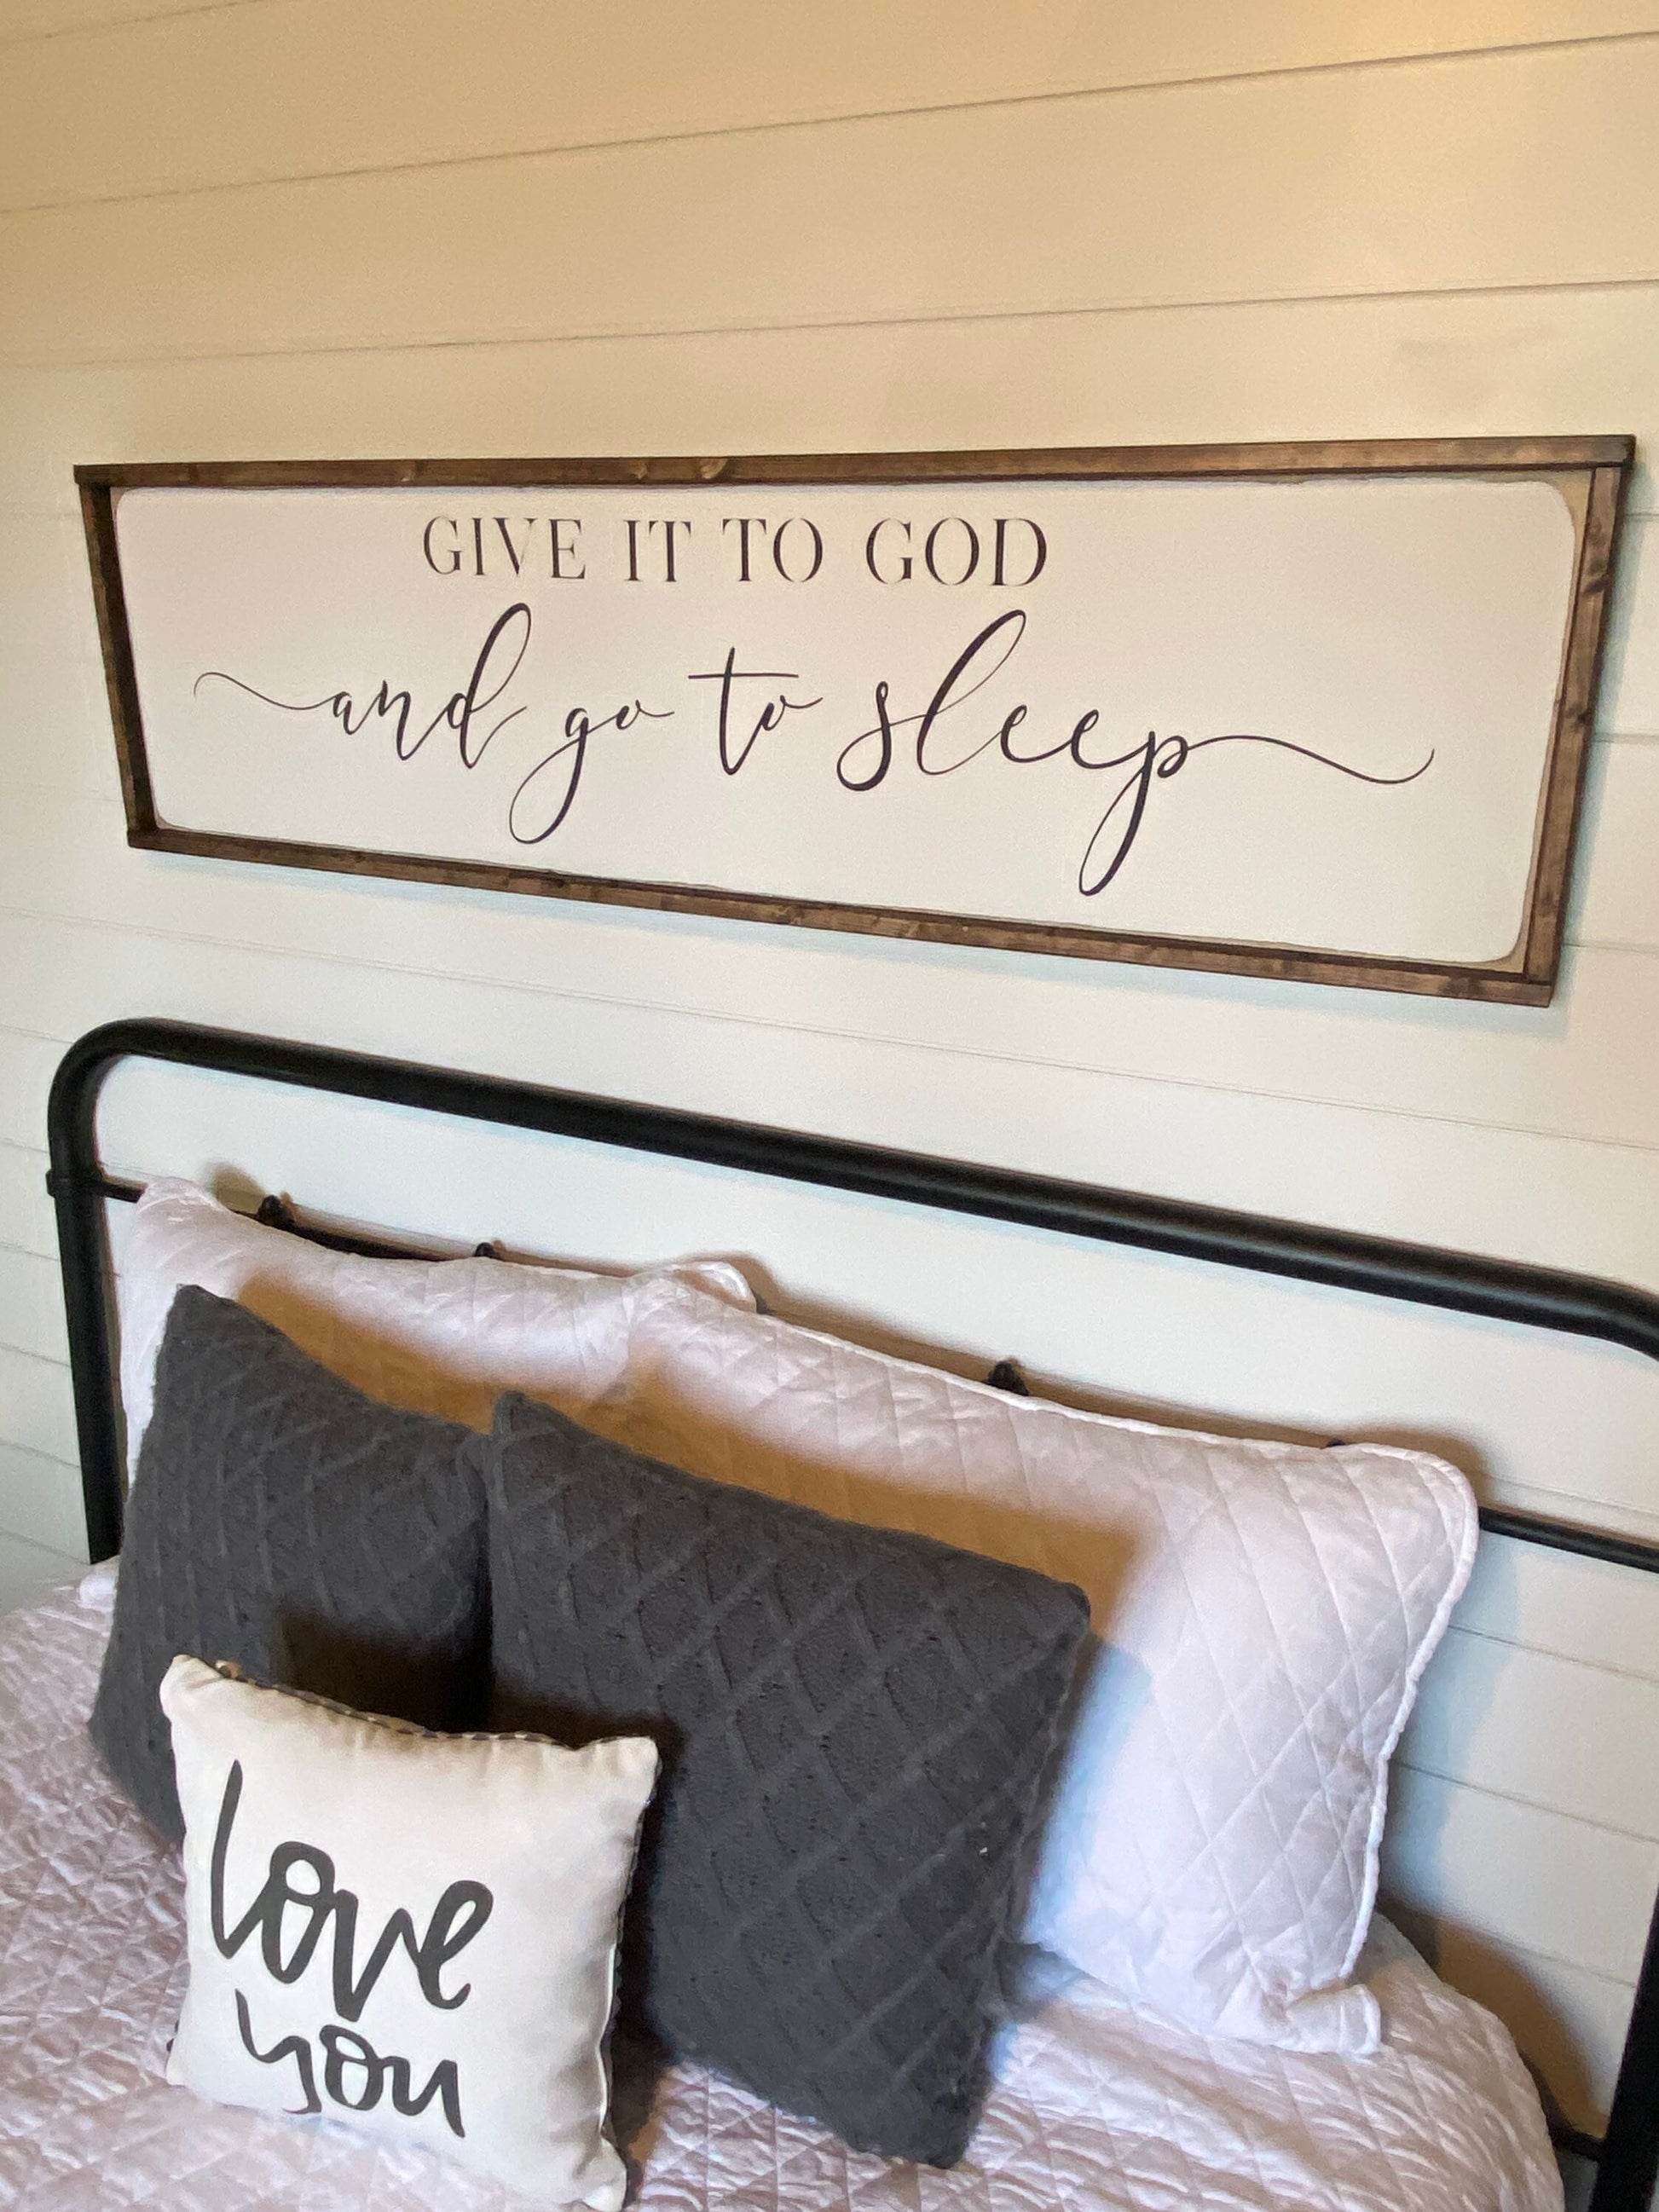 give it to God and go to sleep - above the bed sign [FREE SHIPPING!]